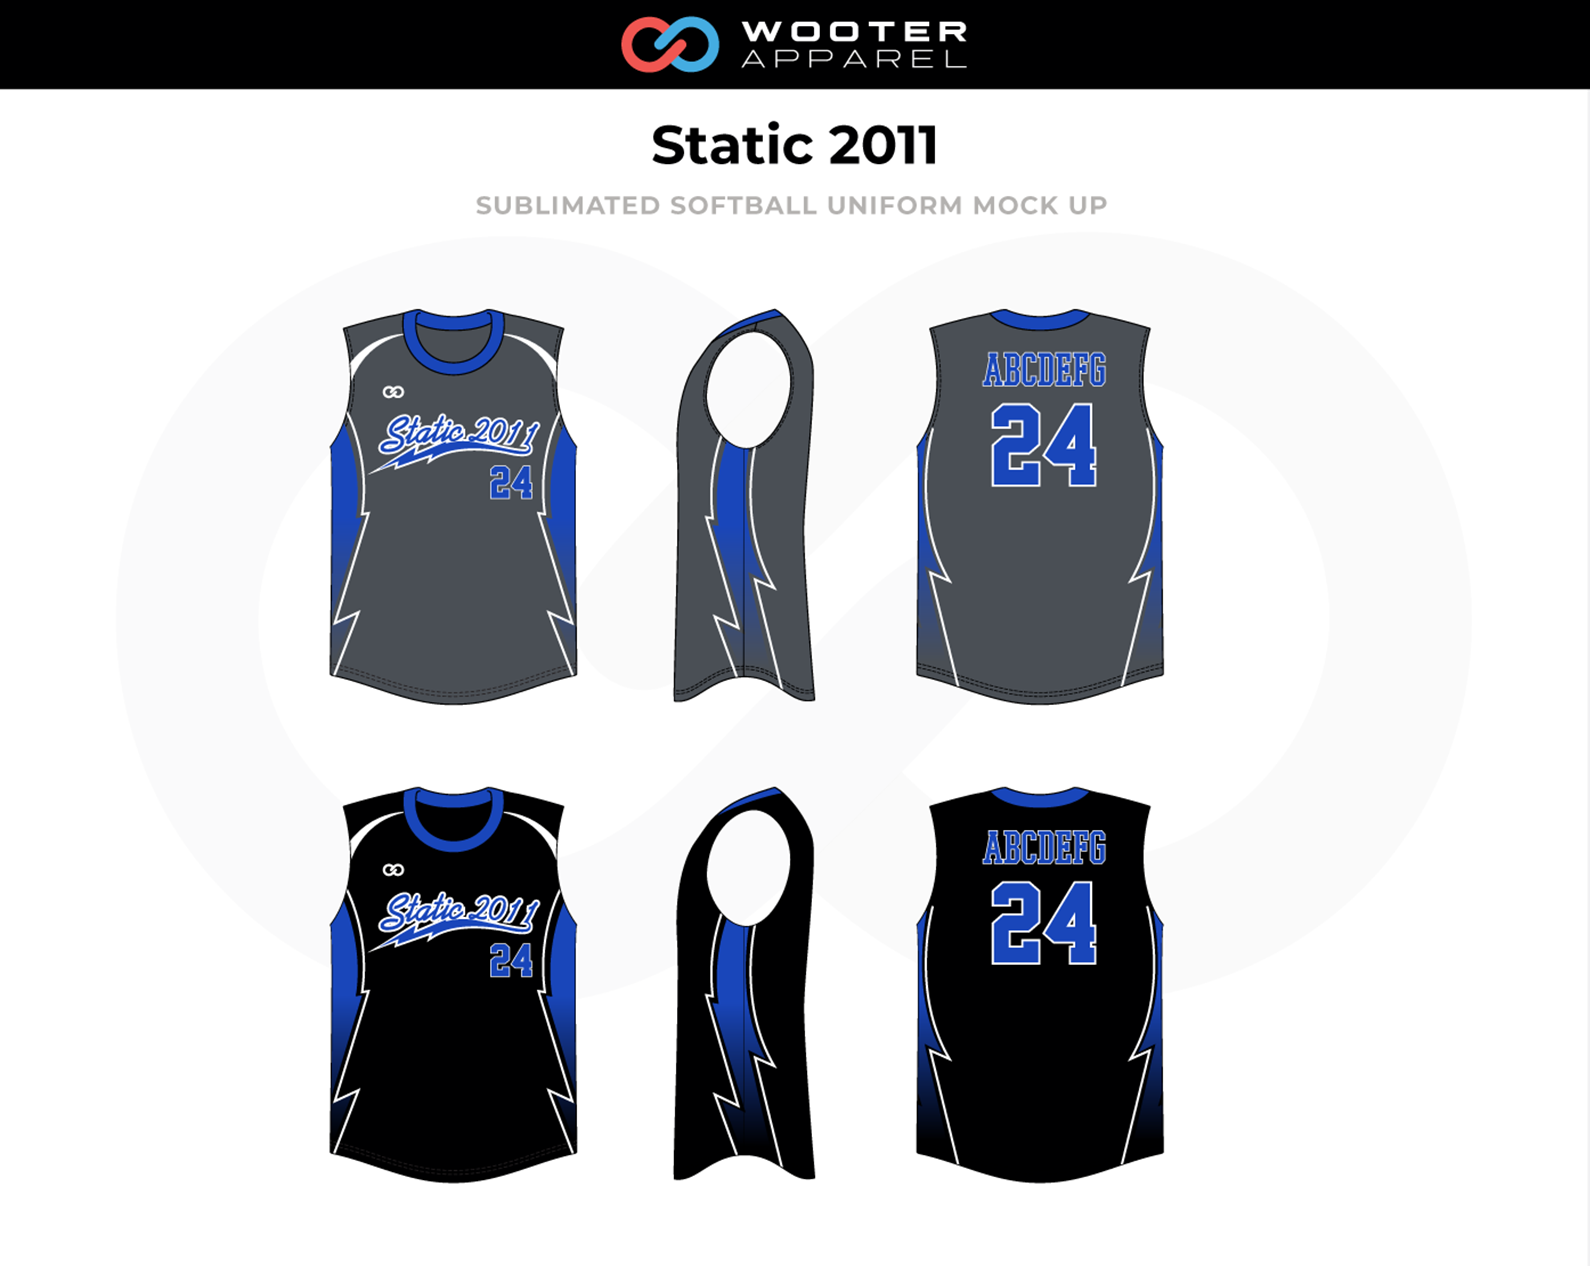 Static-2011-Sublimated-Sleevless-Softball-Uniofrm_v1_2018.png